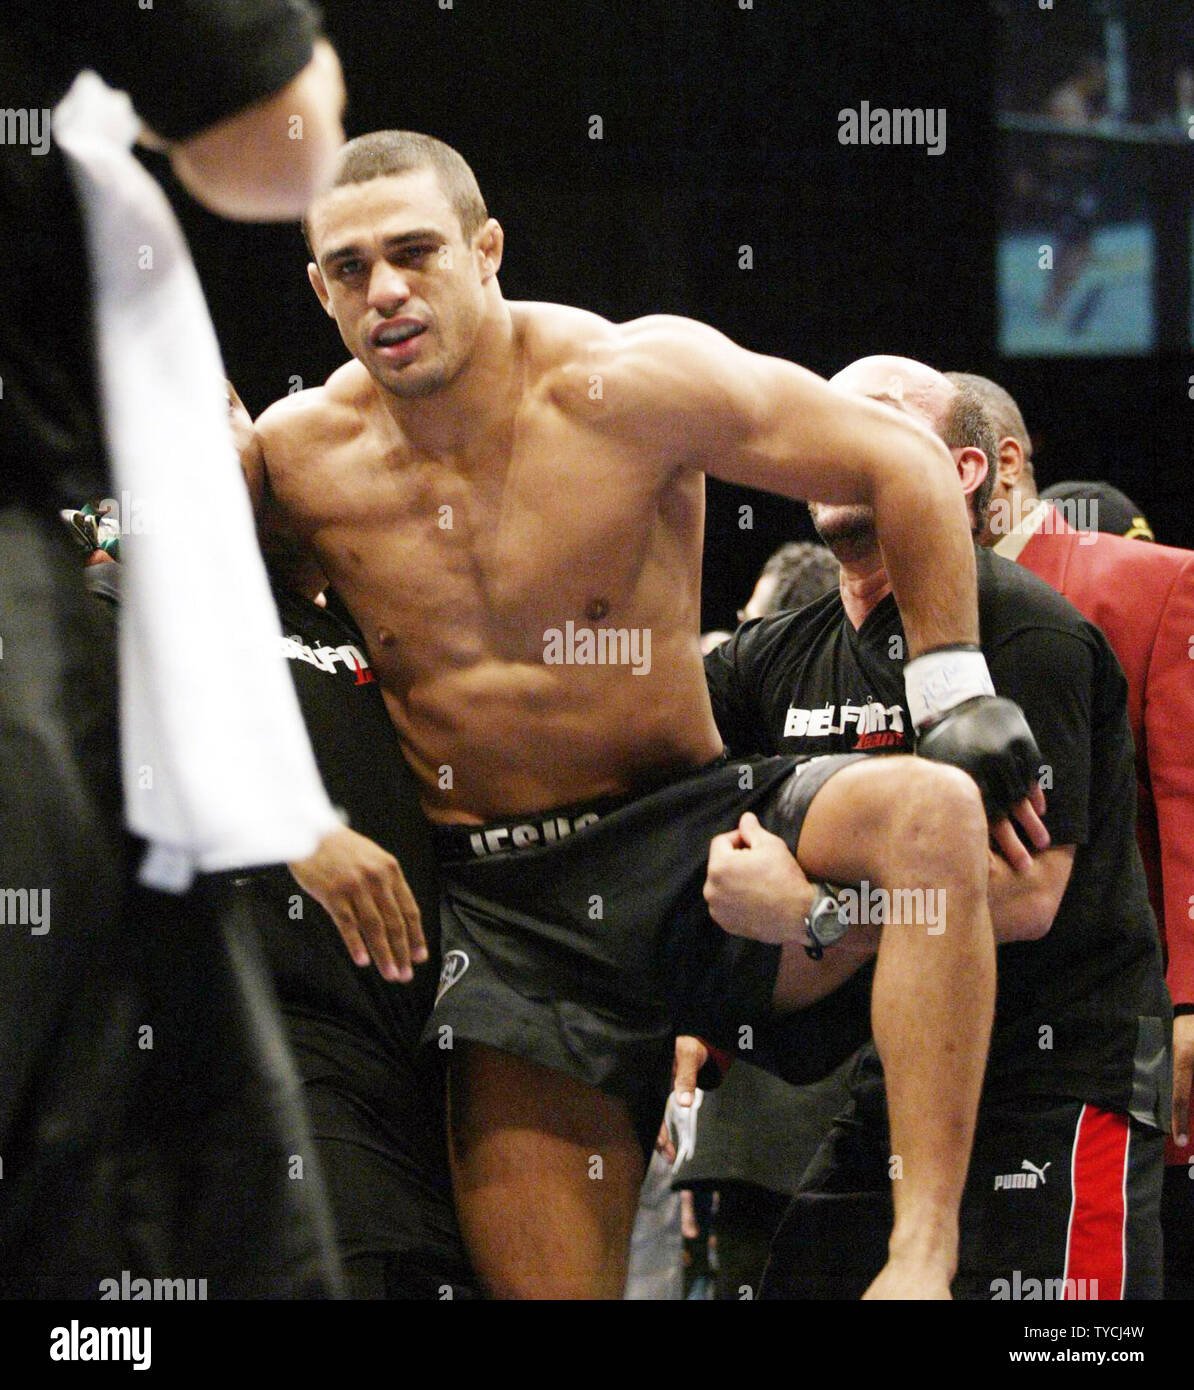 Vitor Belfort of Brazil takes champion Randy Couture's UFC Light Heavyweight title in :48 of round 1 when Couture suffered a deadly cut on the lower left eyelid before 17,000 fans at Mandalay Bay in Las Vegas, January 31, 2004. (UPI Photo/Roger Williams) Stock Photo